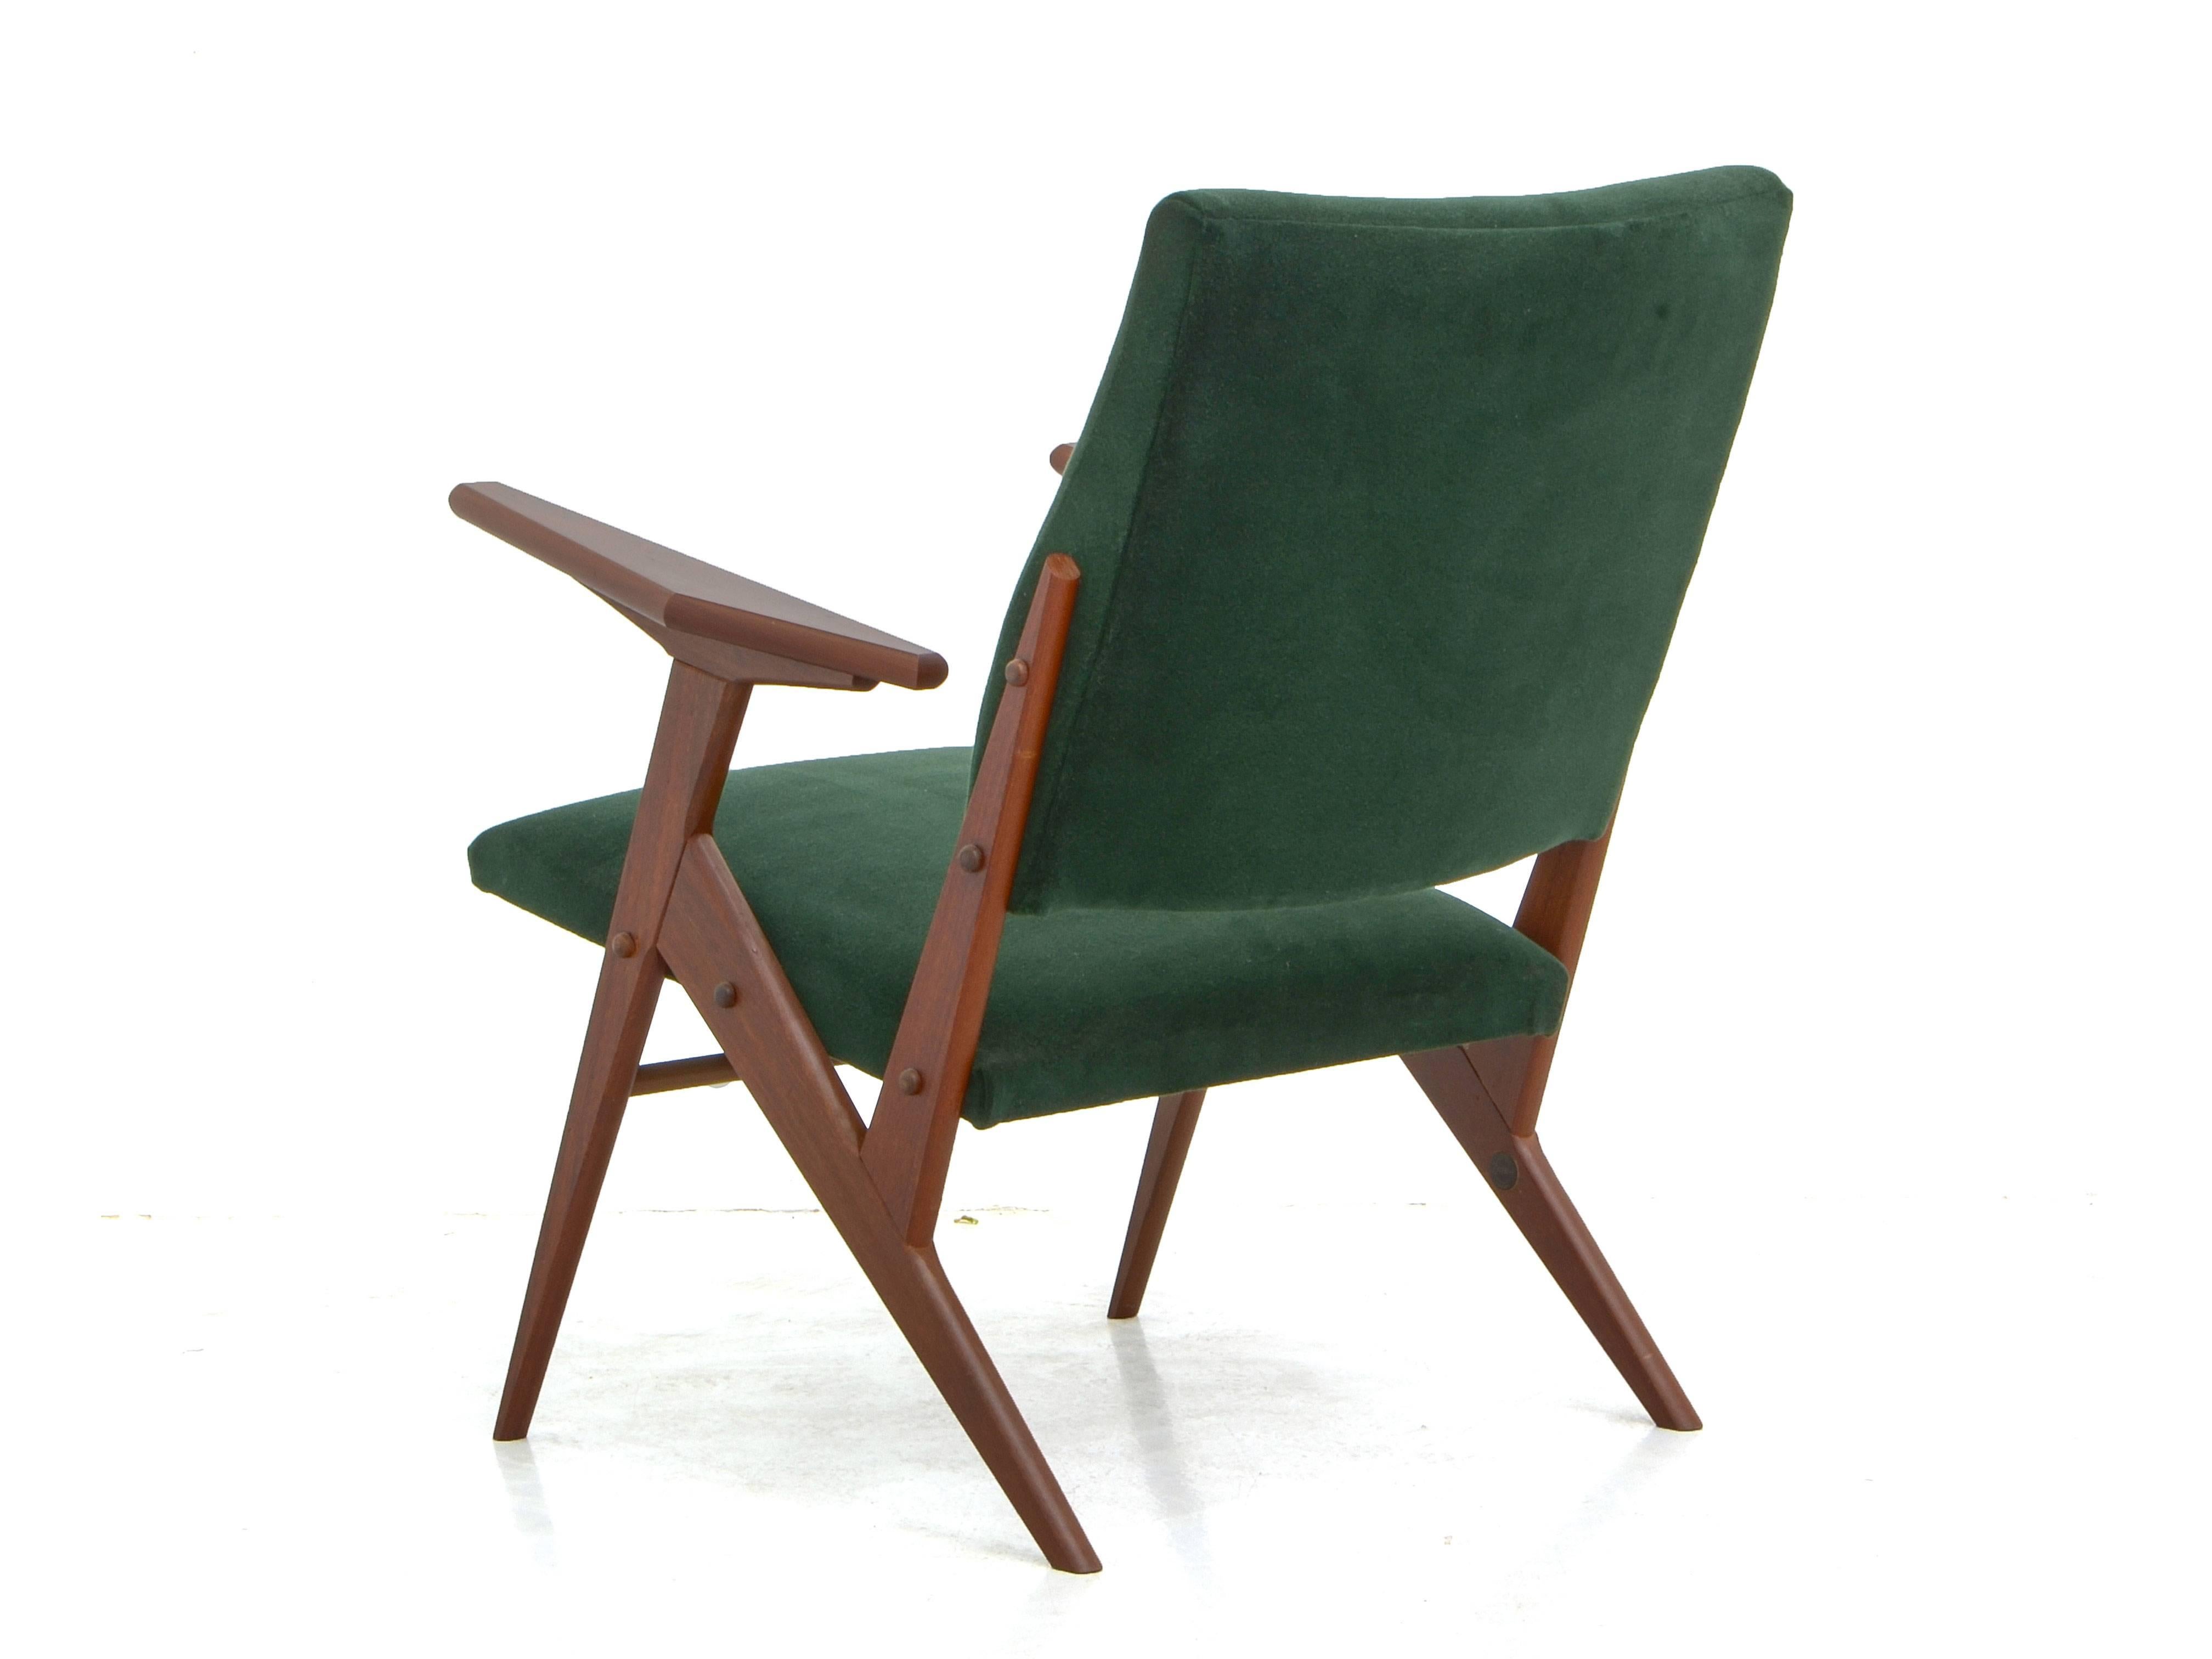 This armchair, in the Brazilian midcentury style, was created by José Zanine Caldas.

José Zanine Caldas was a designer, architect and artist. His work is known for its intense creativity and experiential aspect, always slightly ahead of its